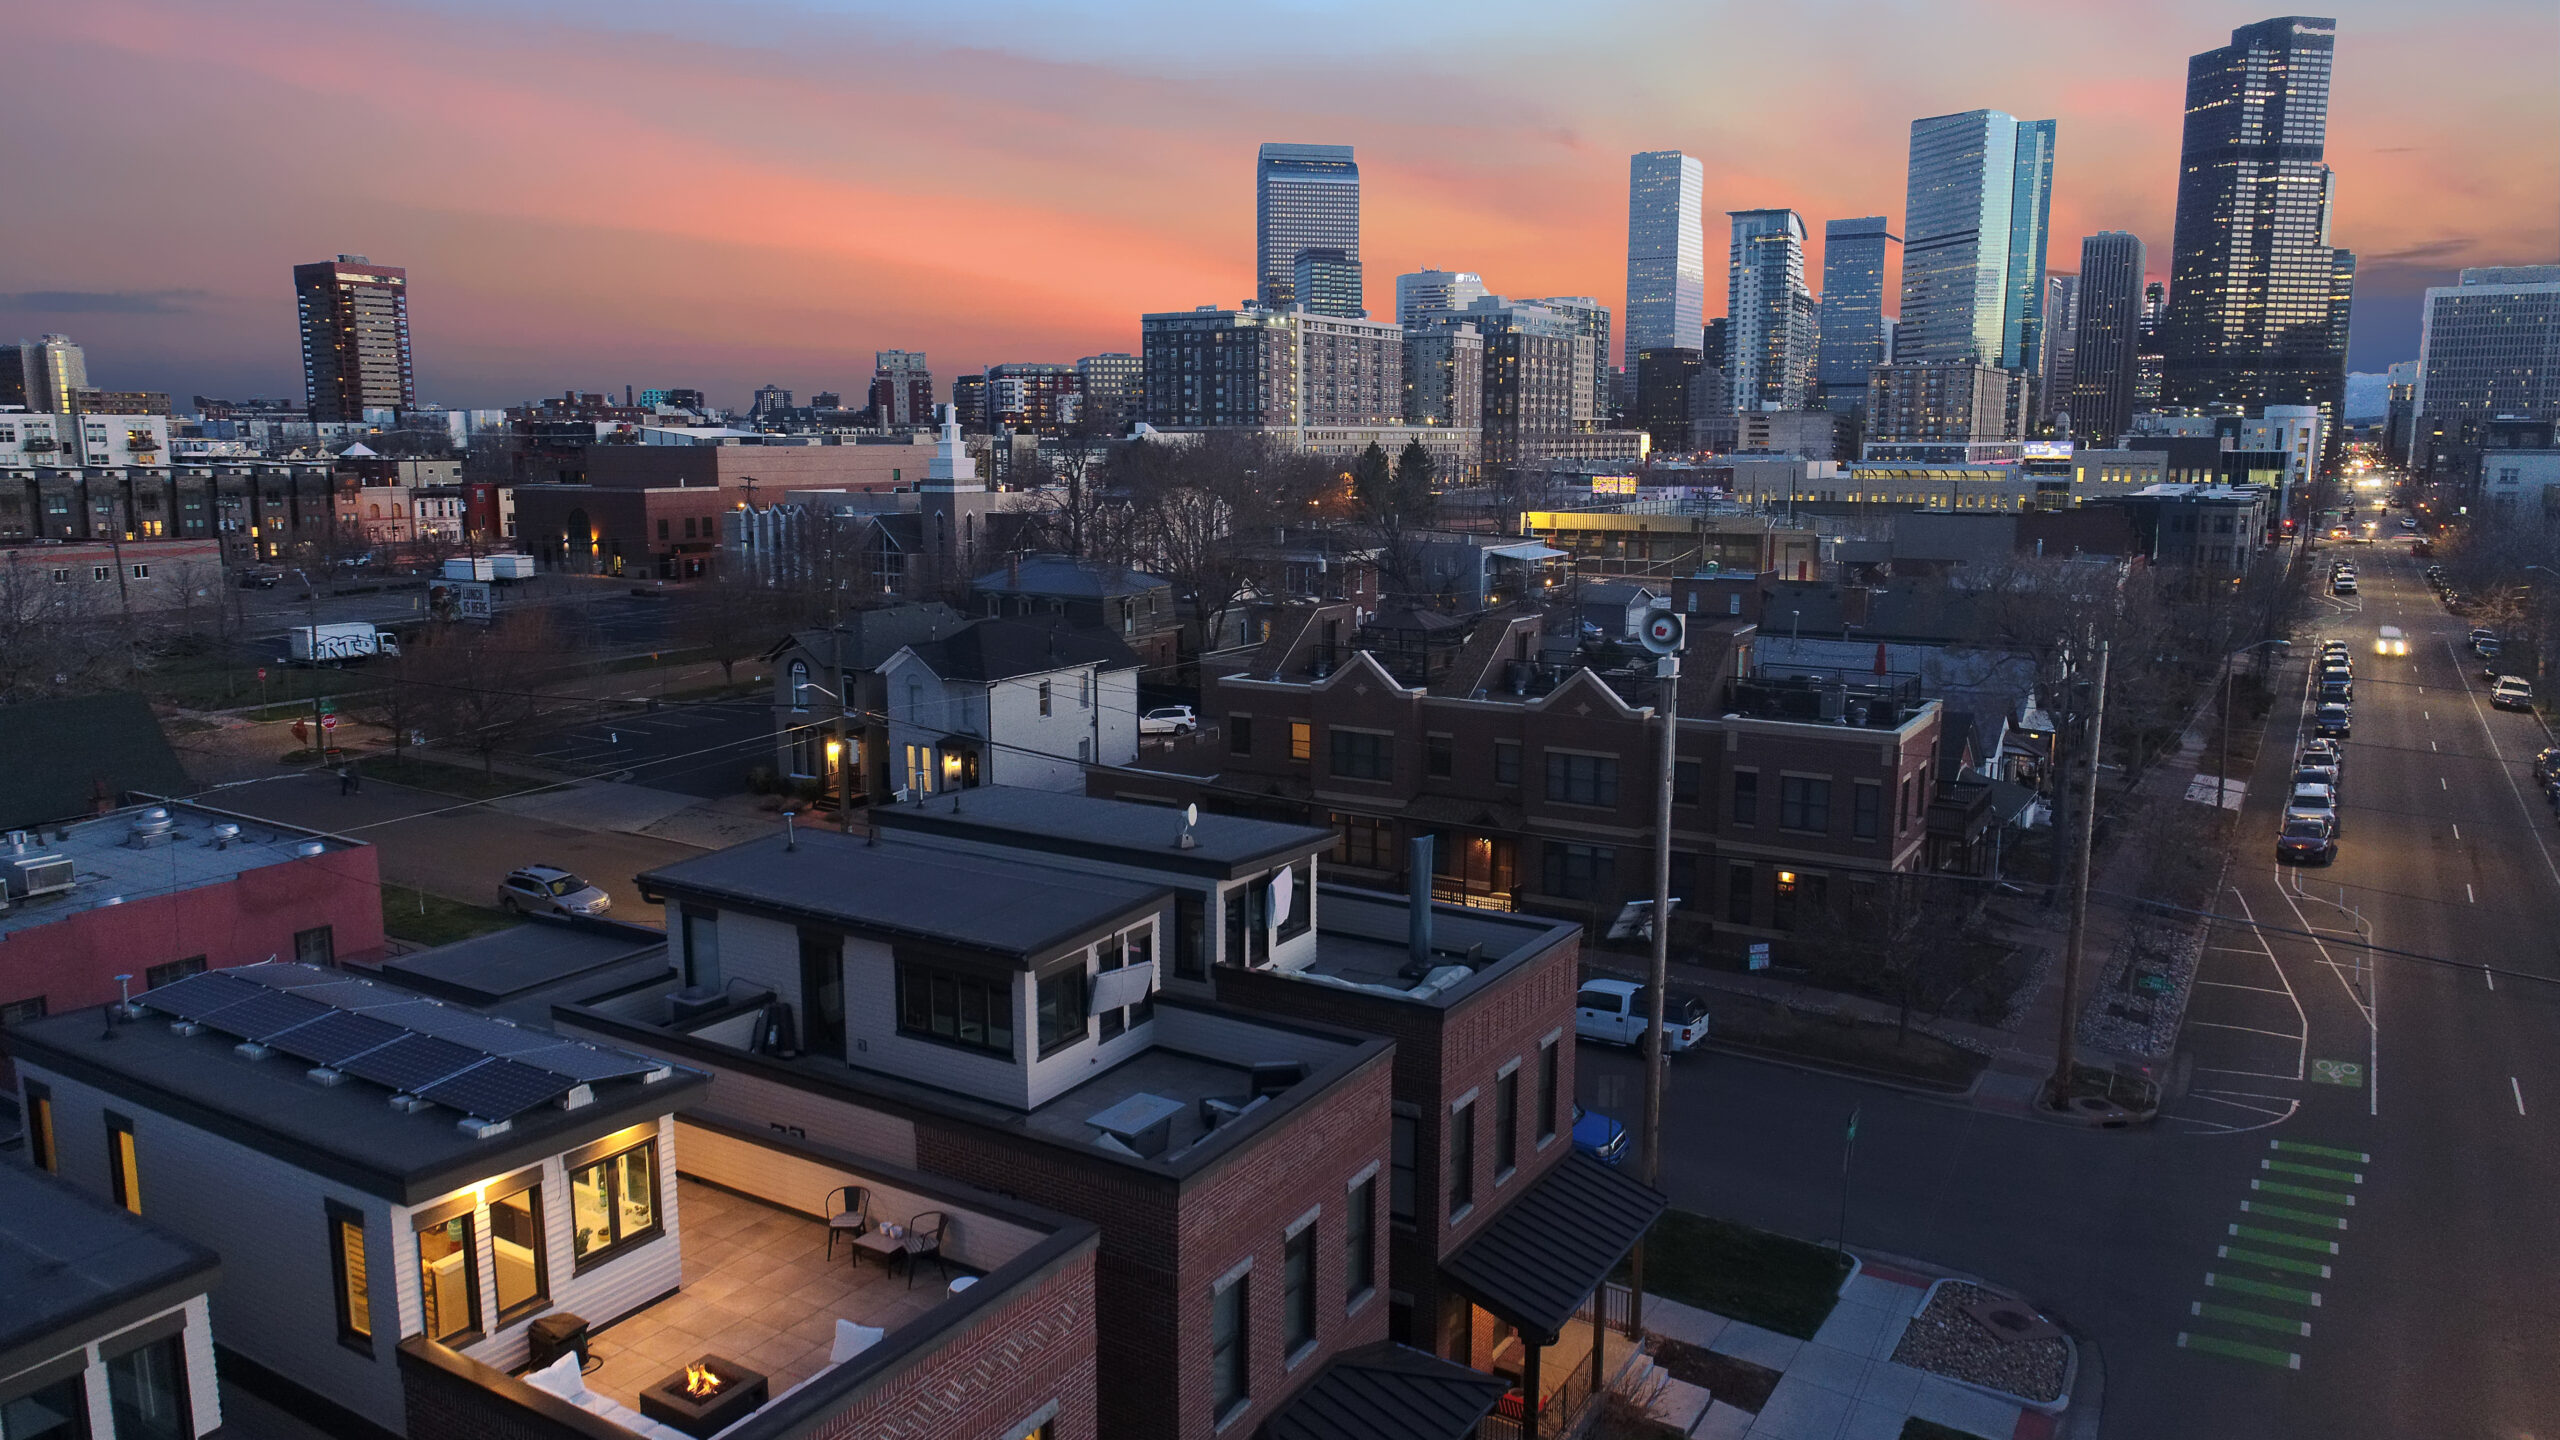 Are you looking to enhance your real estate photography and empower your business? Learn how real estate drones work to supercharge your listings.